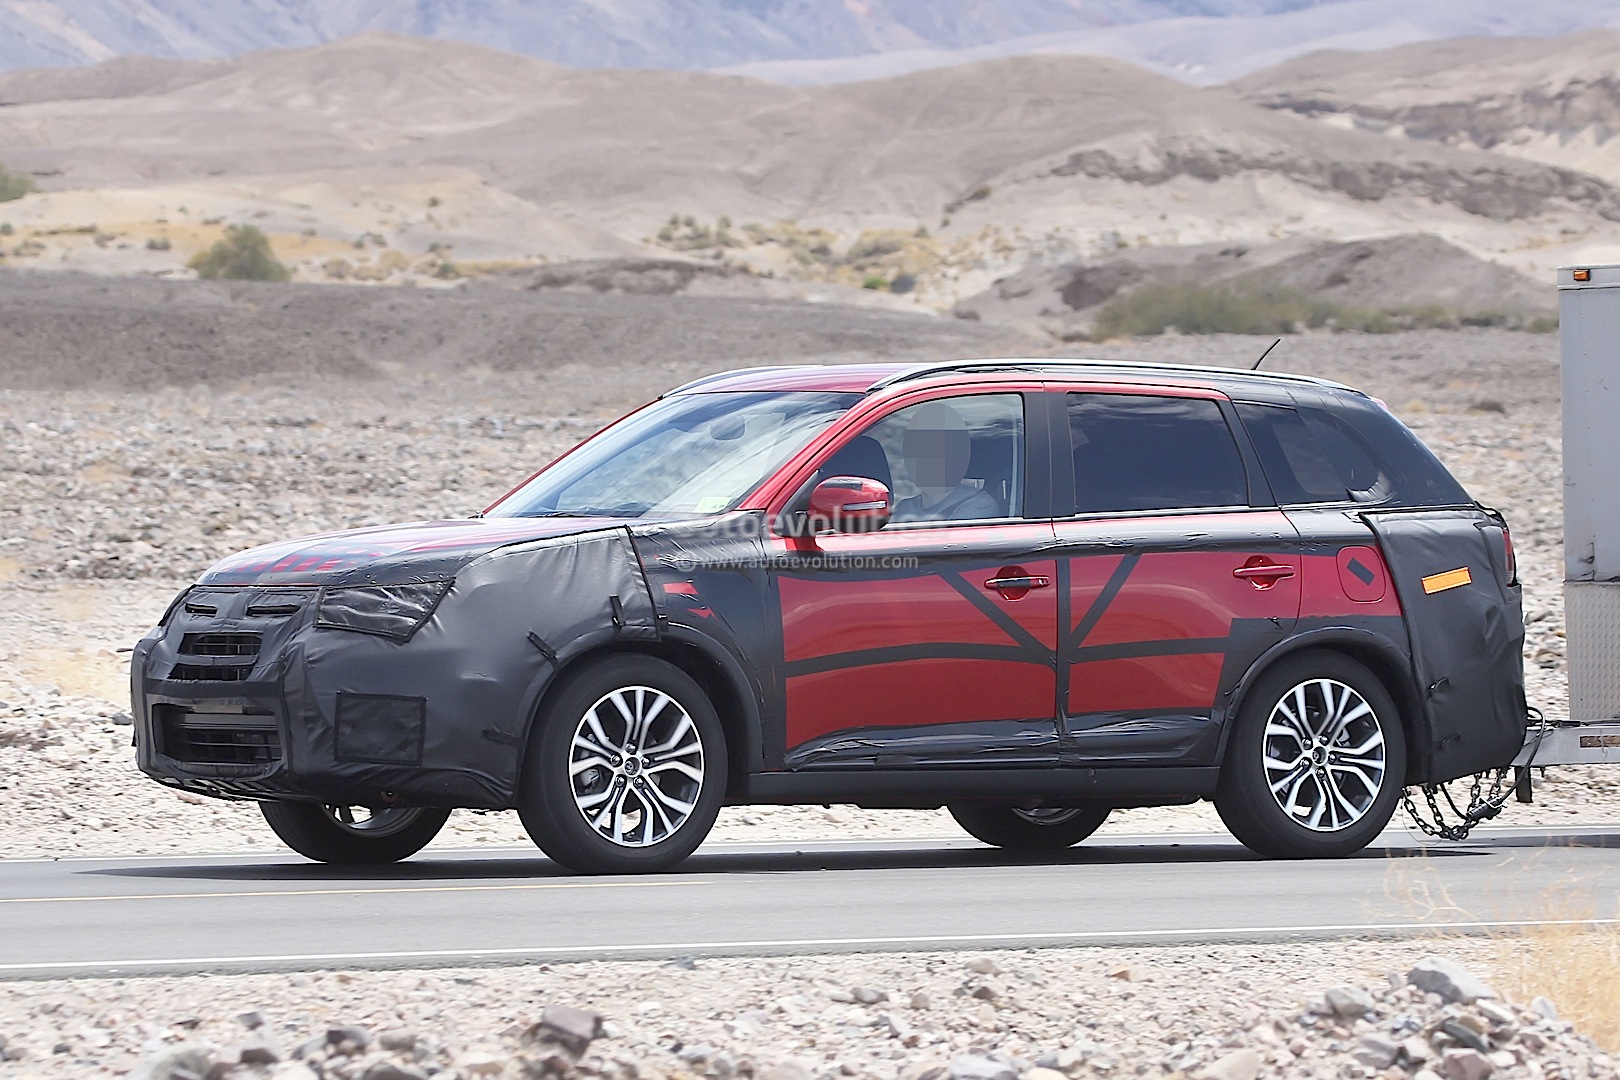 2015 Mitsubishi Outlander Facelift Spied Towing a Trailer - autoevolution